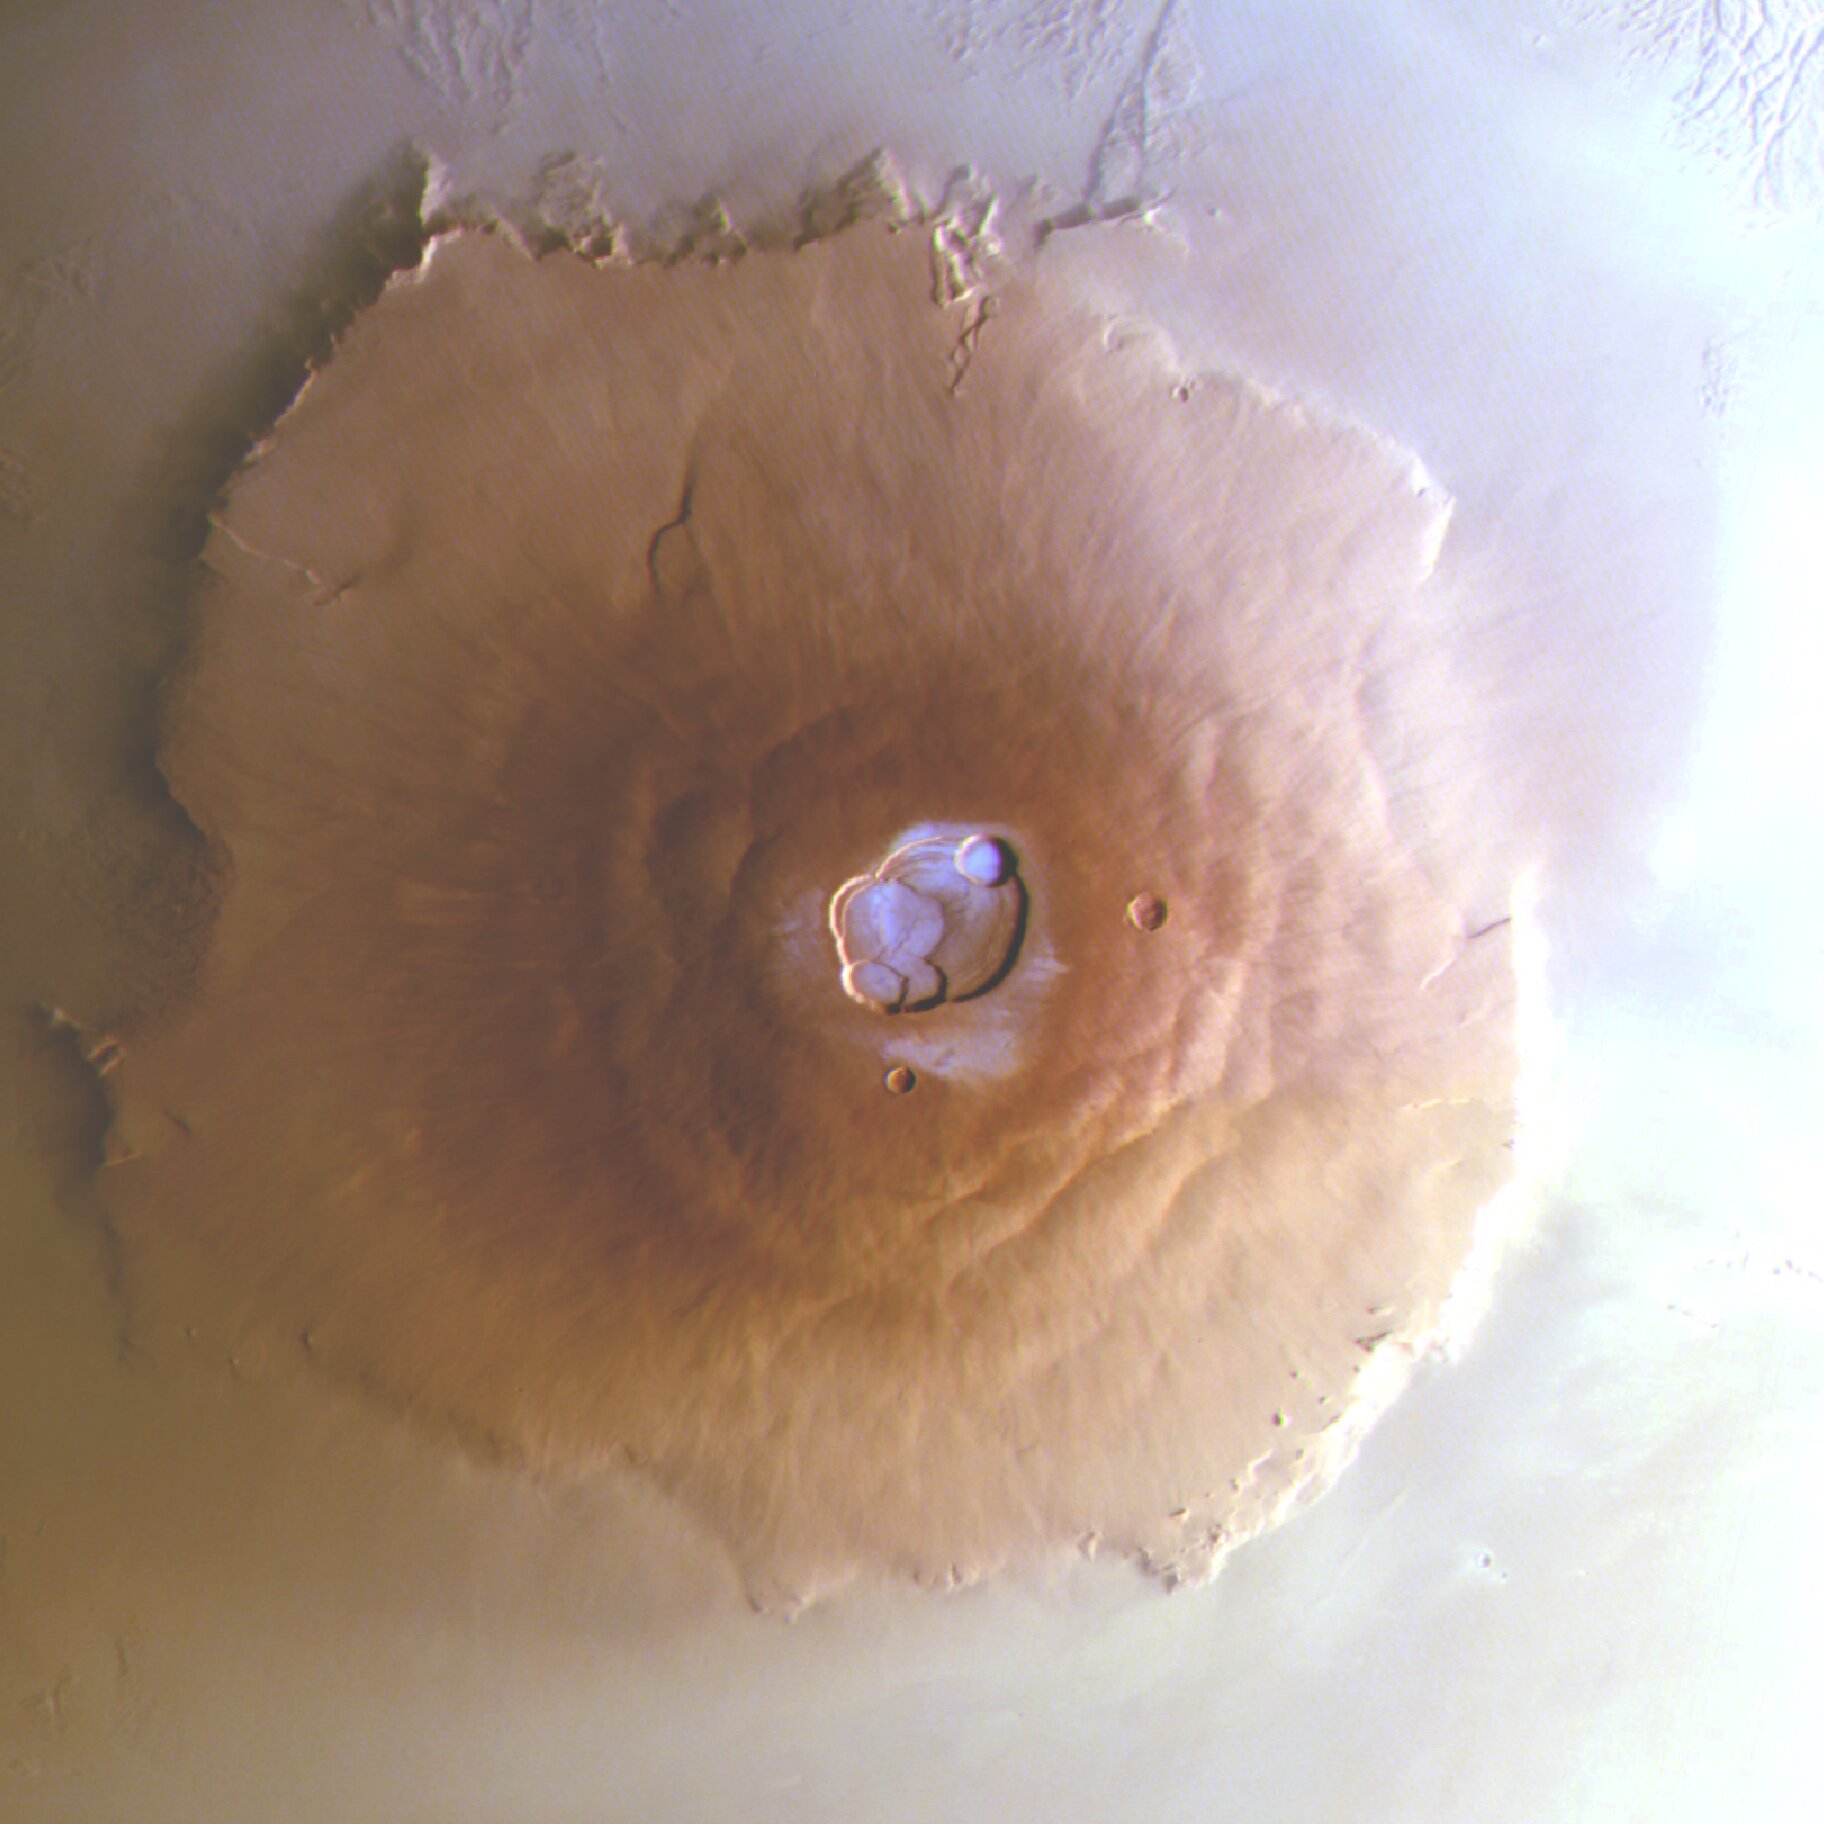 First detection of frost on the solar system's tallest volcanoes on Mars